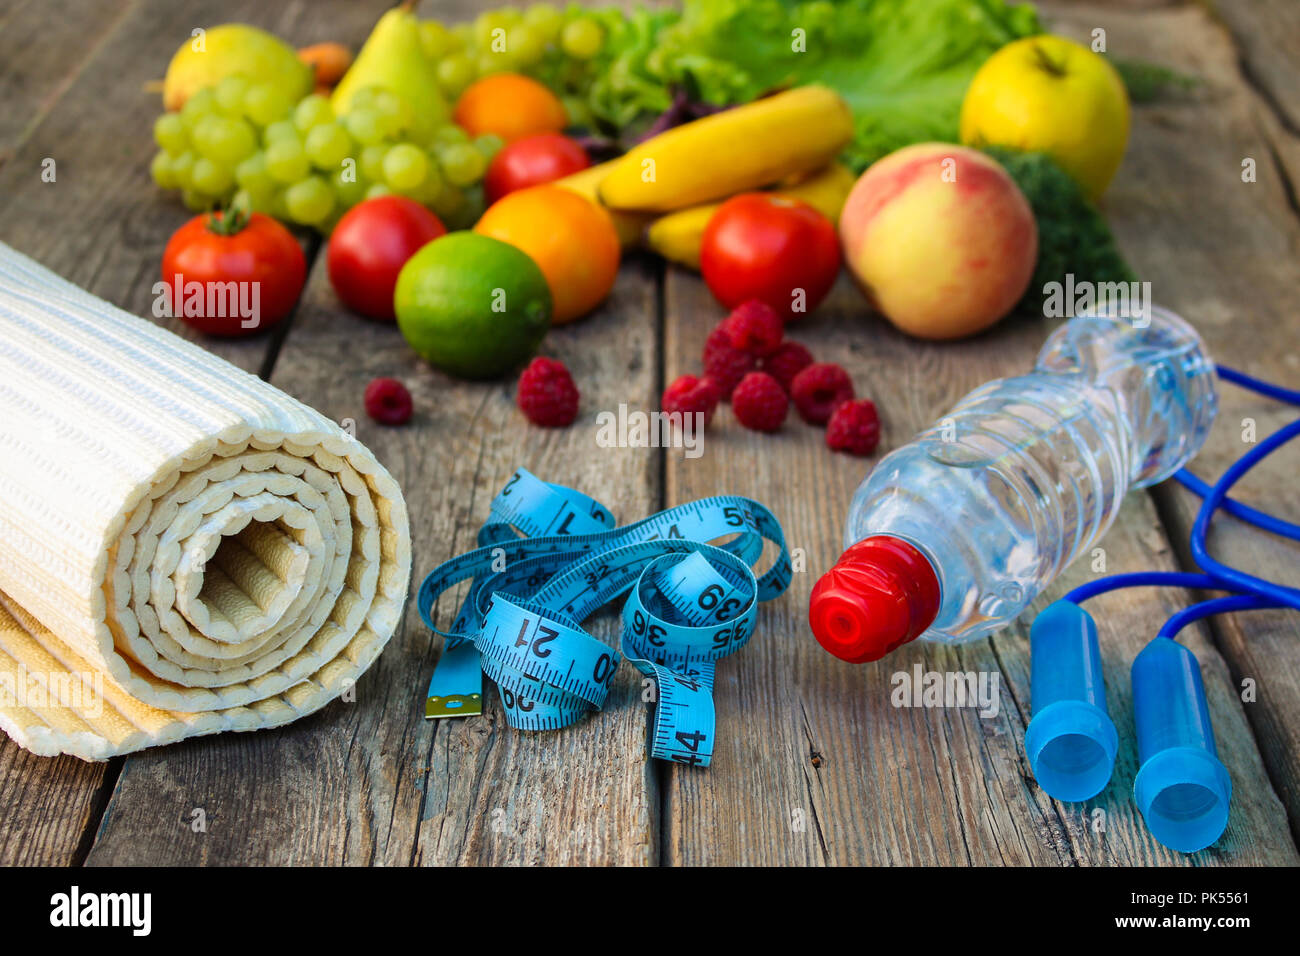 Fruits, vegetables, water, measurement tape and sports goods on wooden background. Stock Photo